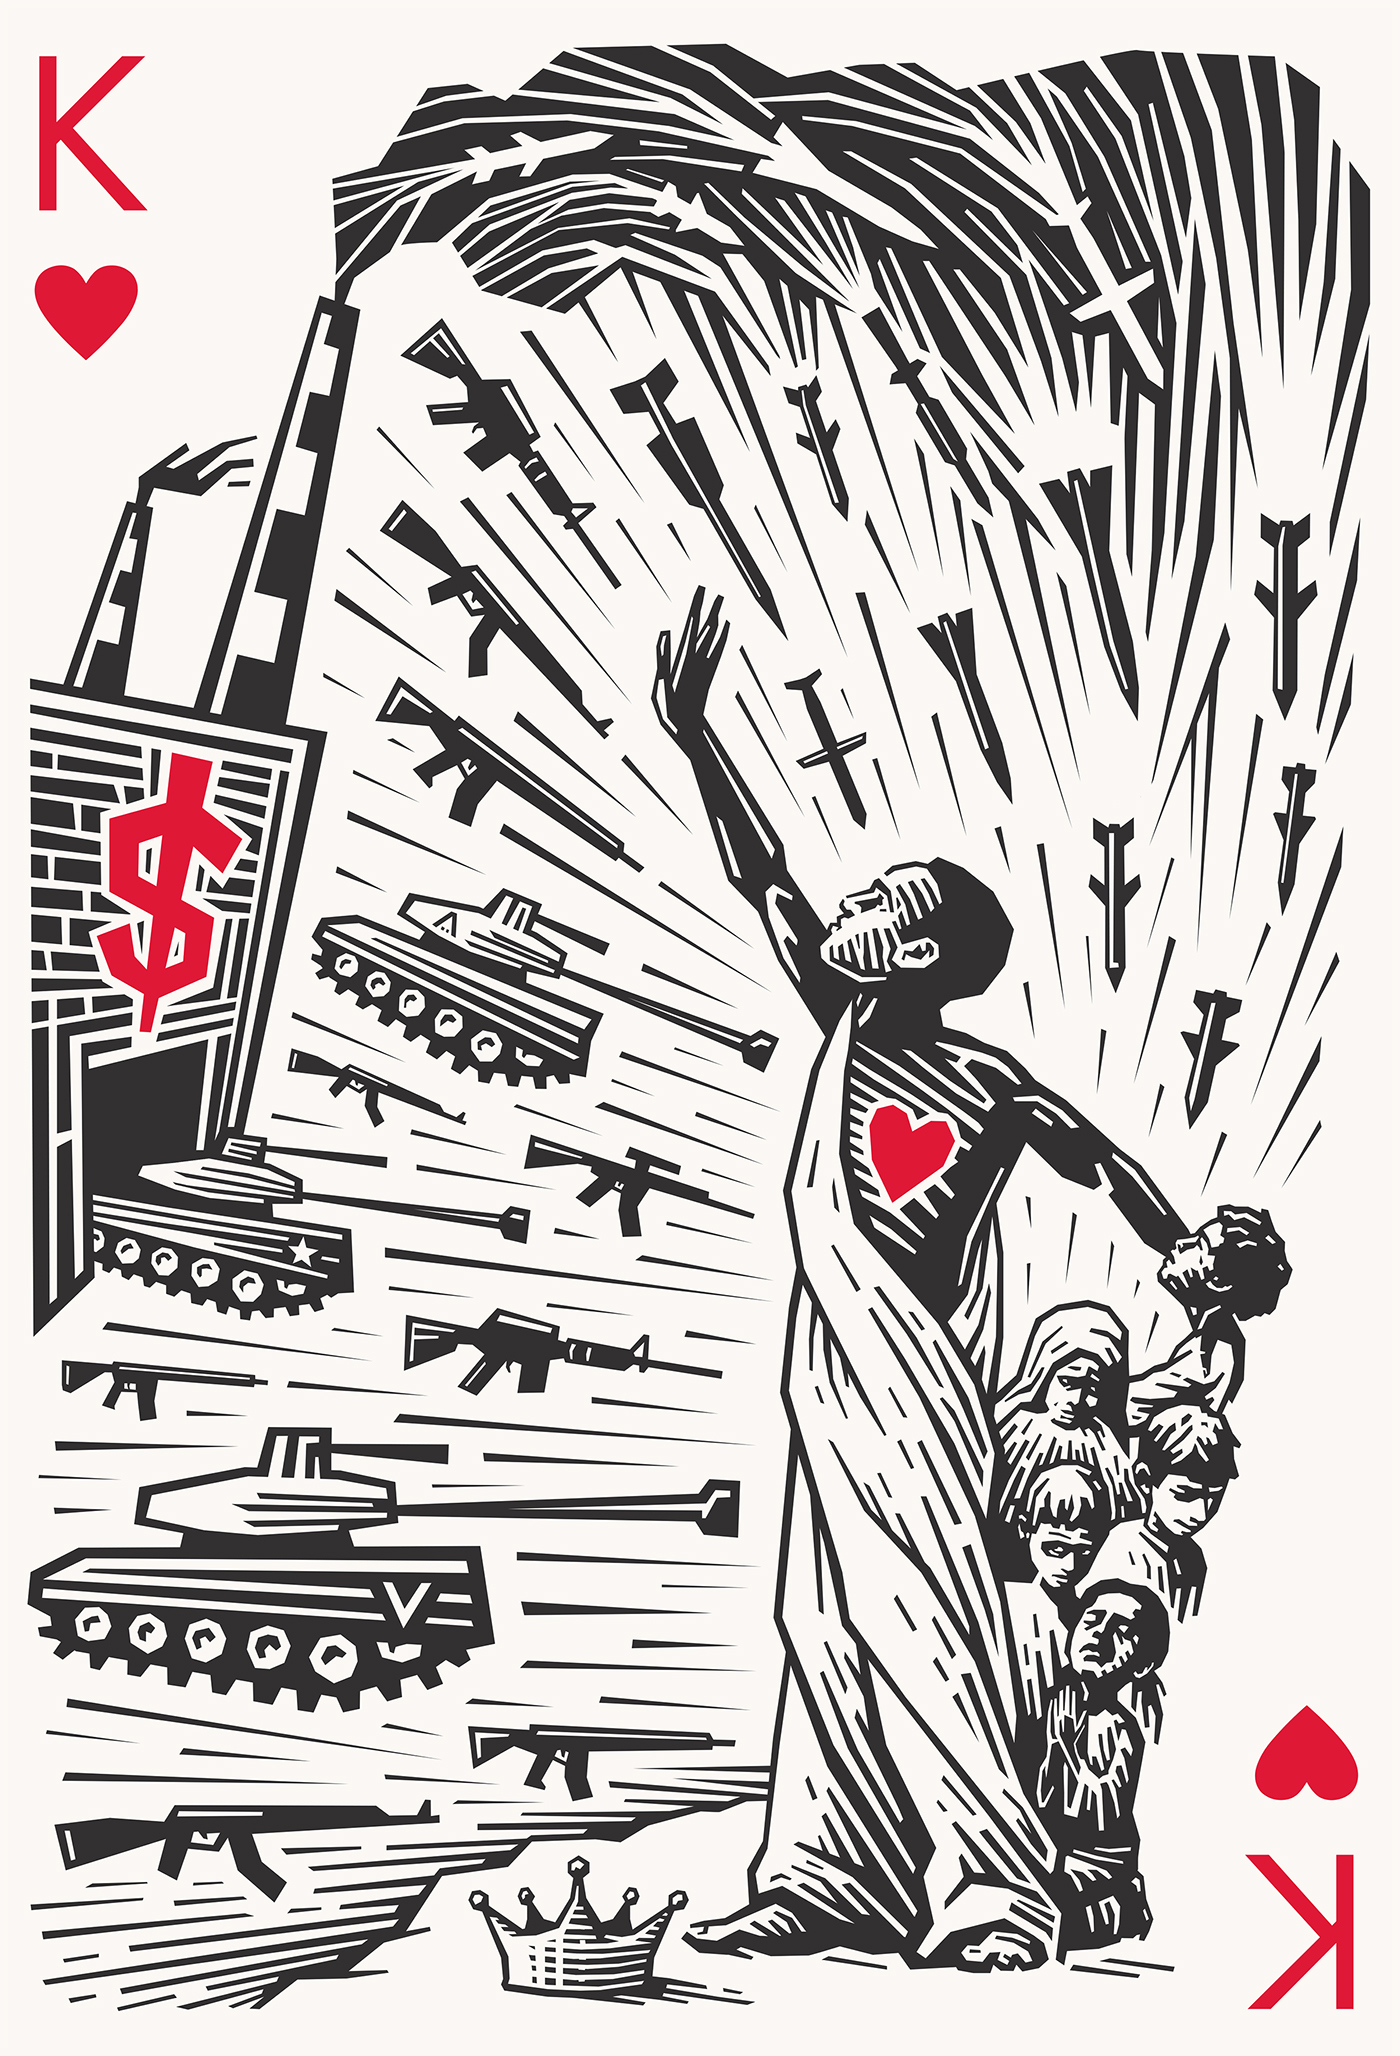 War peace playing card king hearts children money corruption injustice Human rights